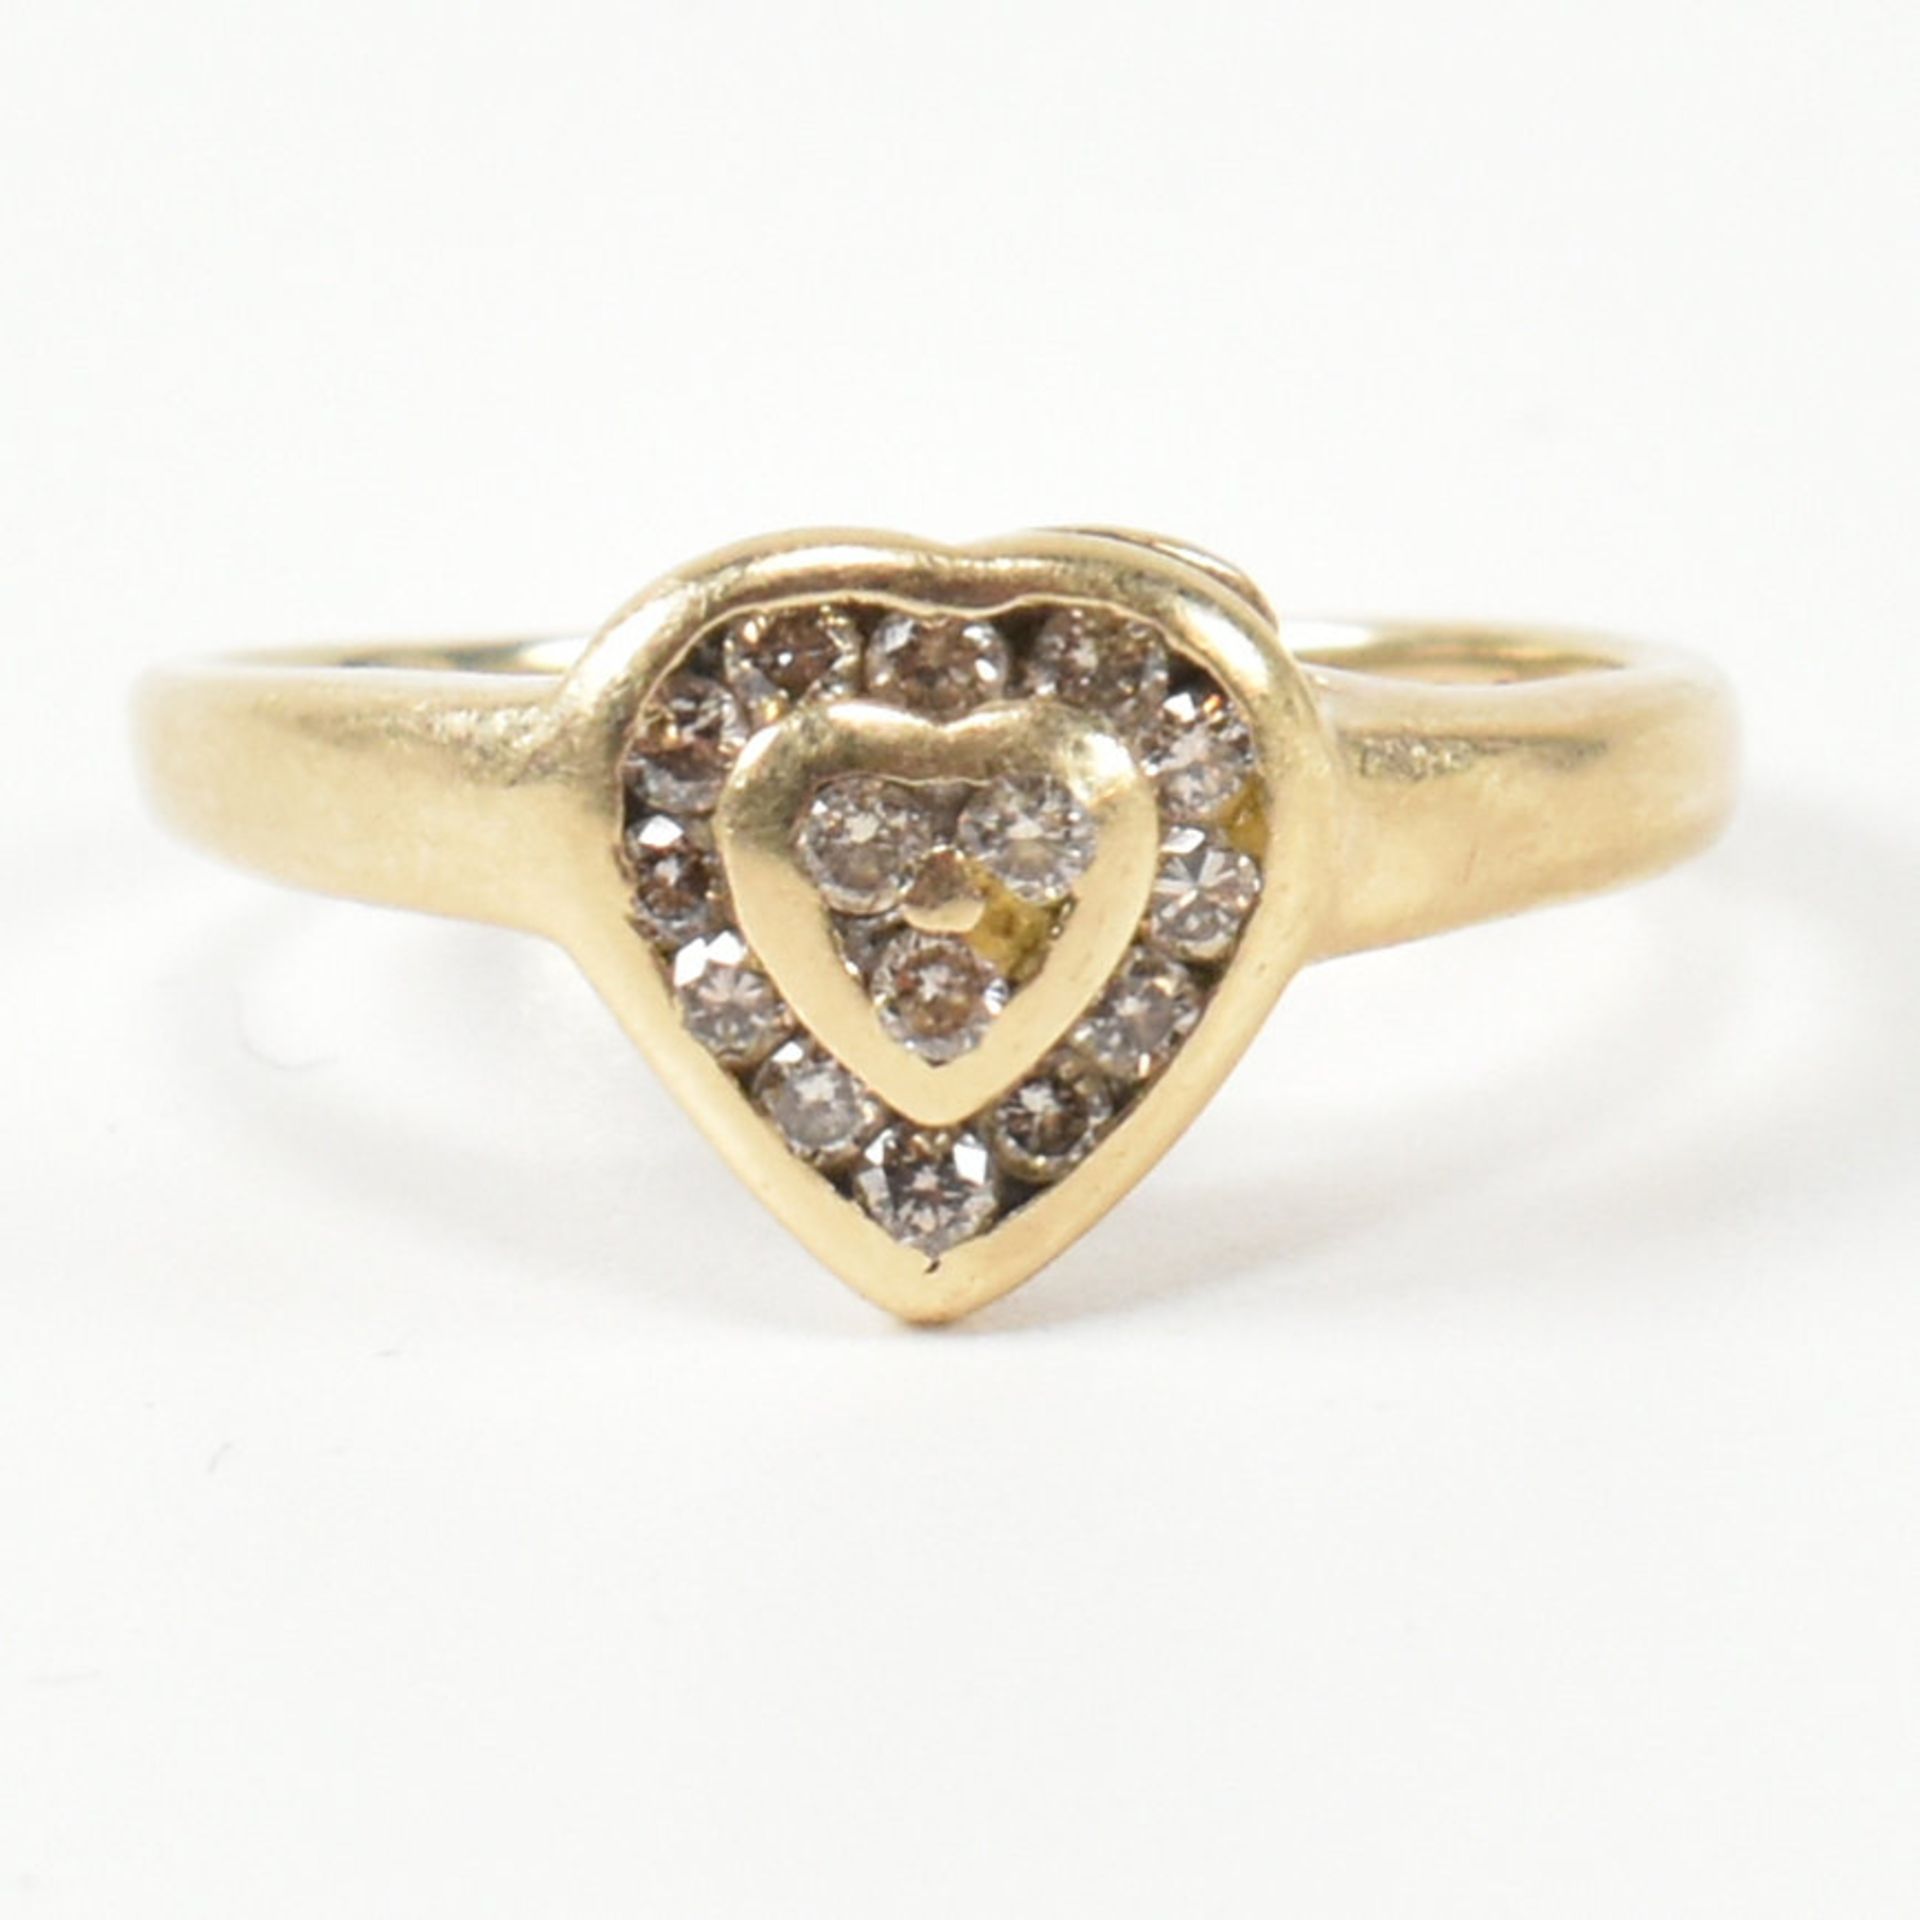 HALLMARKED 9CT GOLD & DIAMOND HEART CLUSTER RING - Image 9 of 9